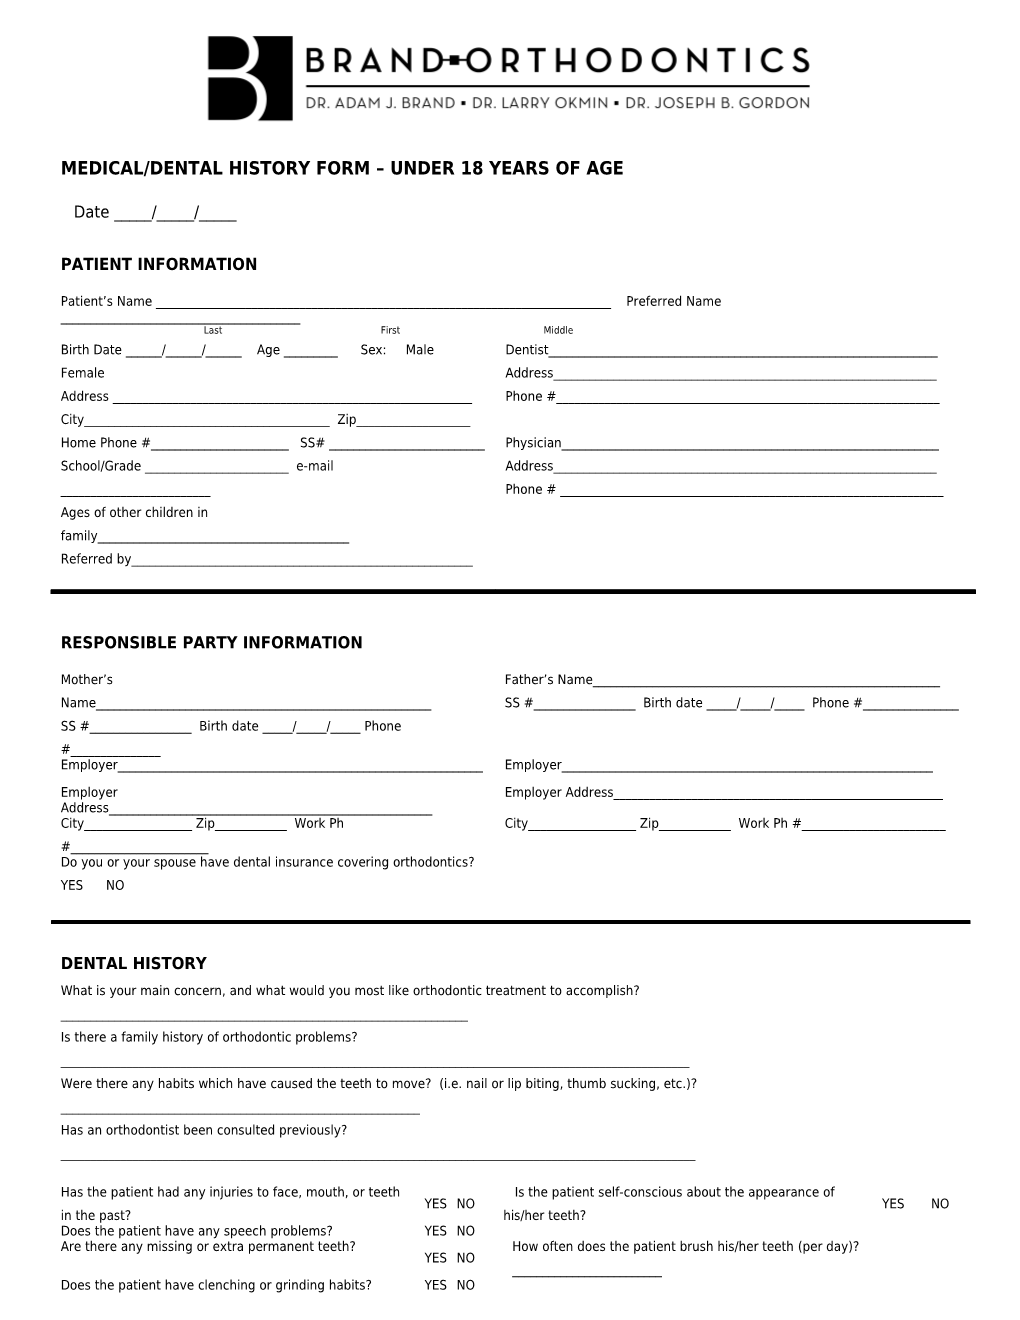 Medical/Dental History Form Under 18 Years of Age